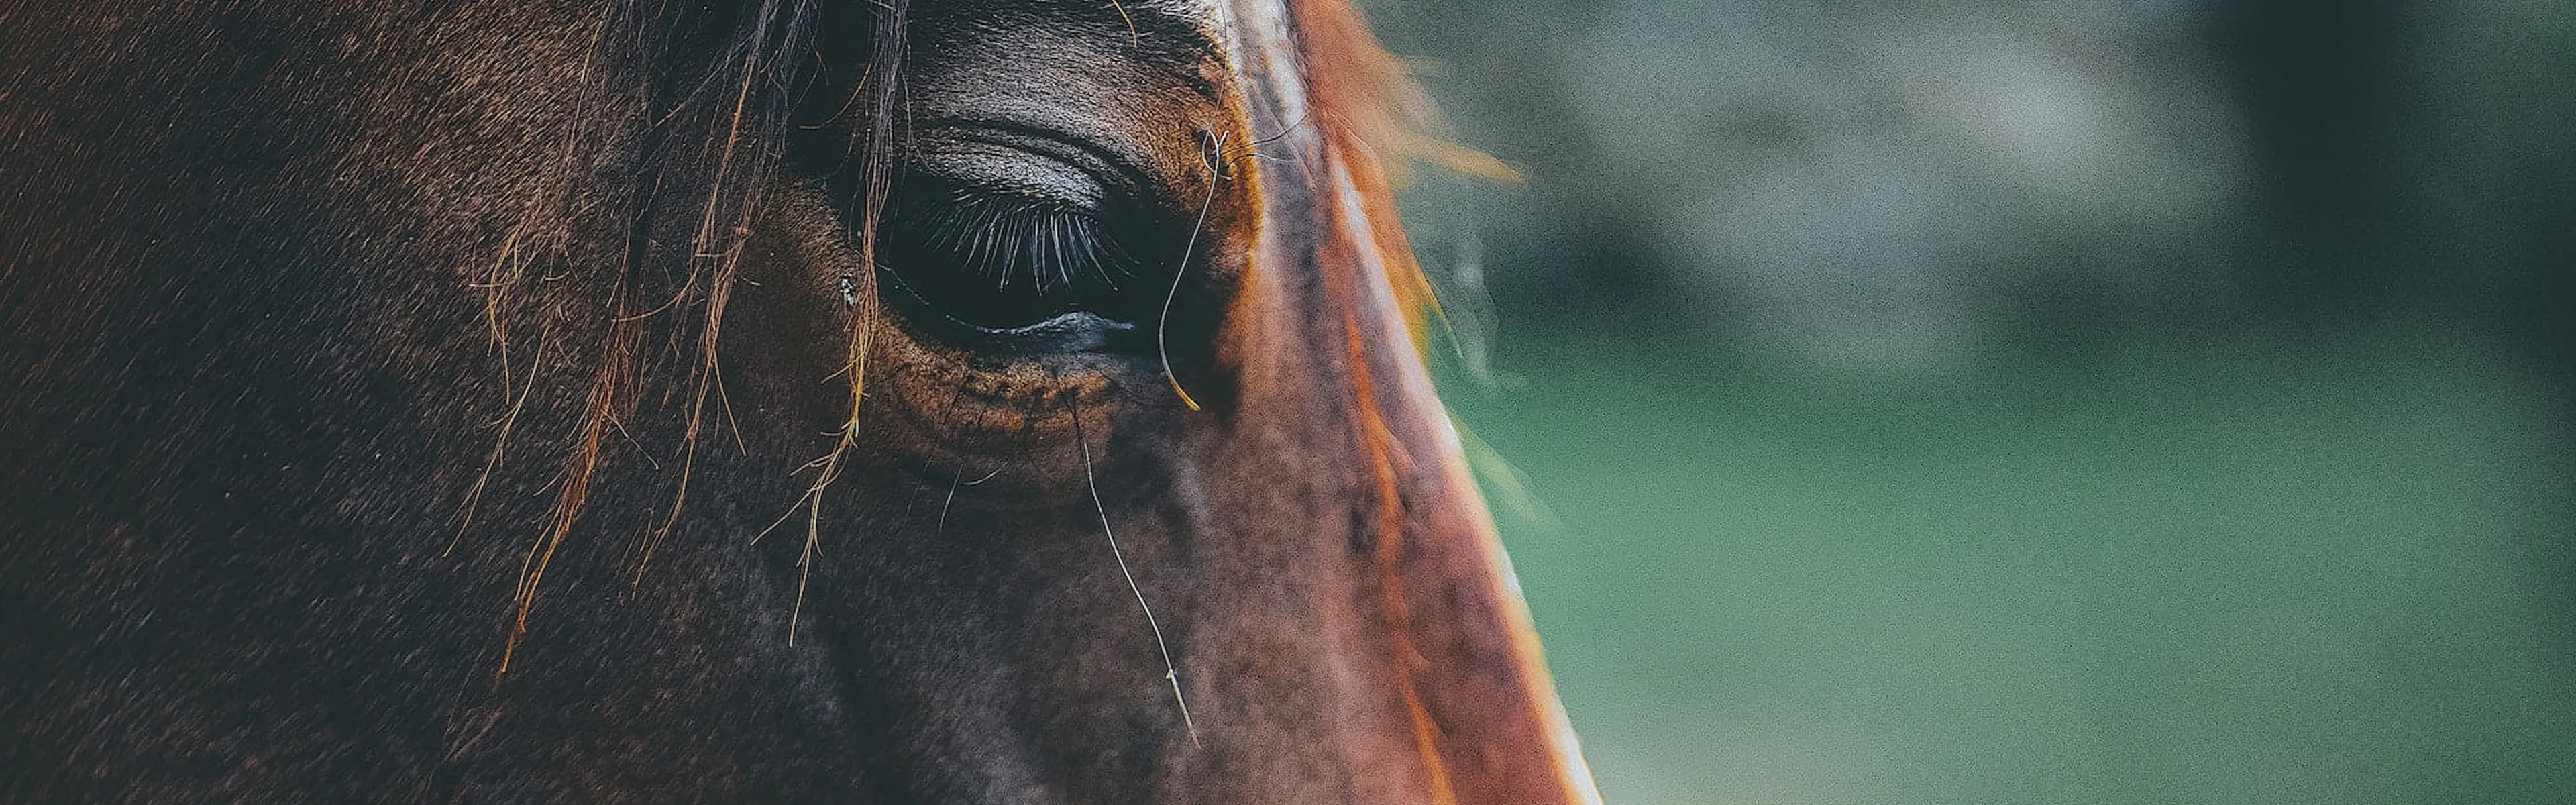 Close up photograph of a horse